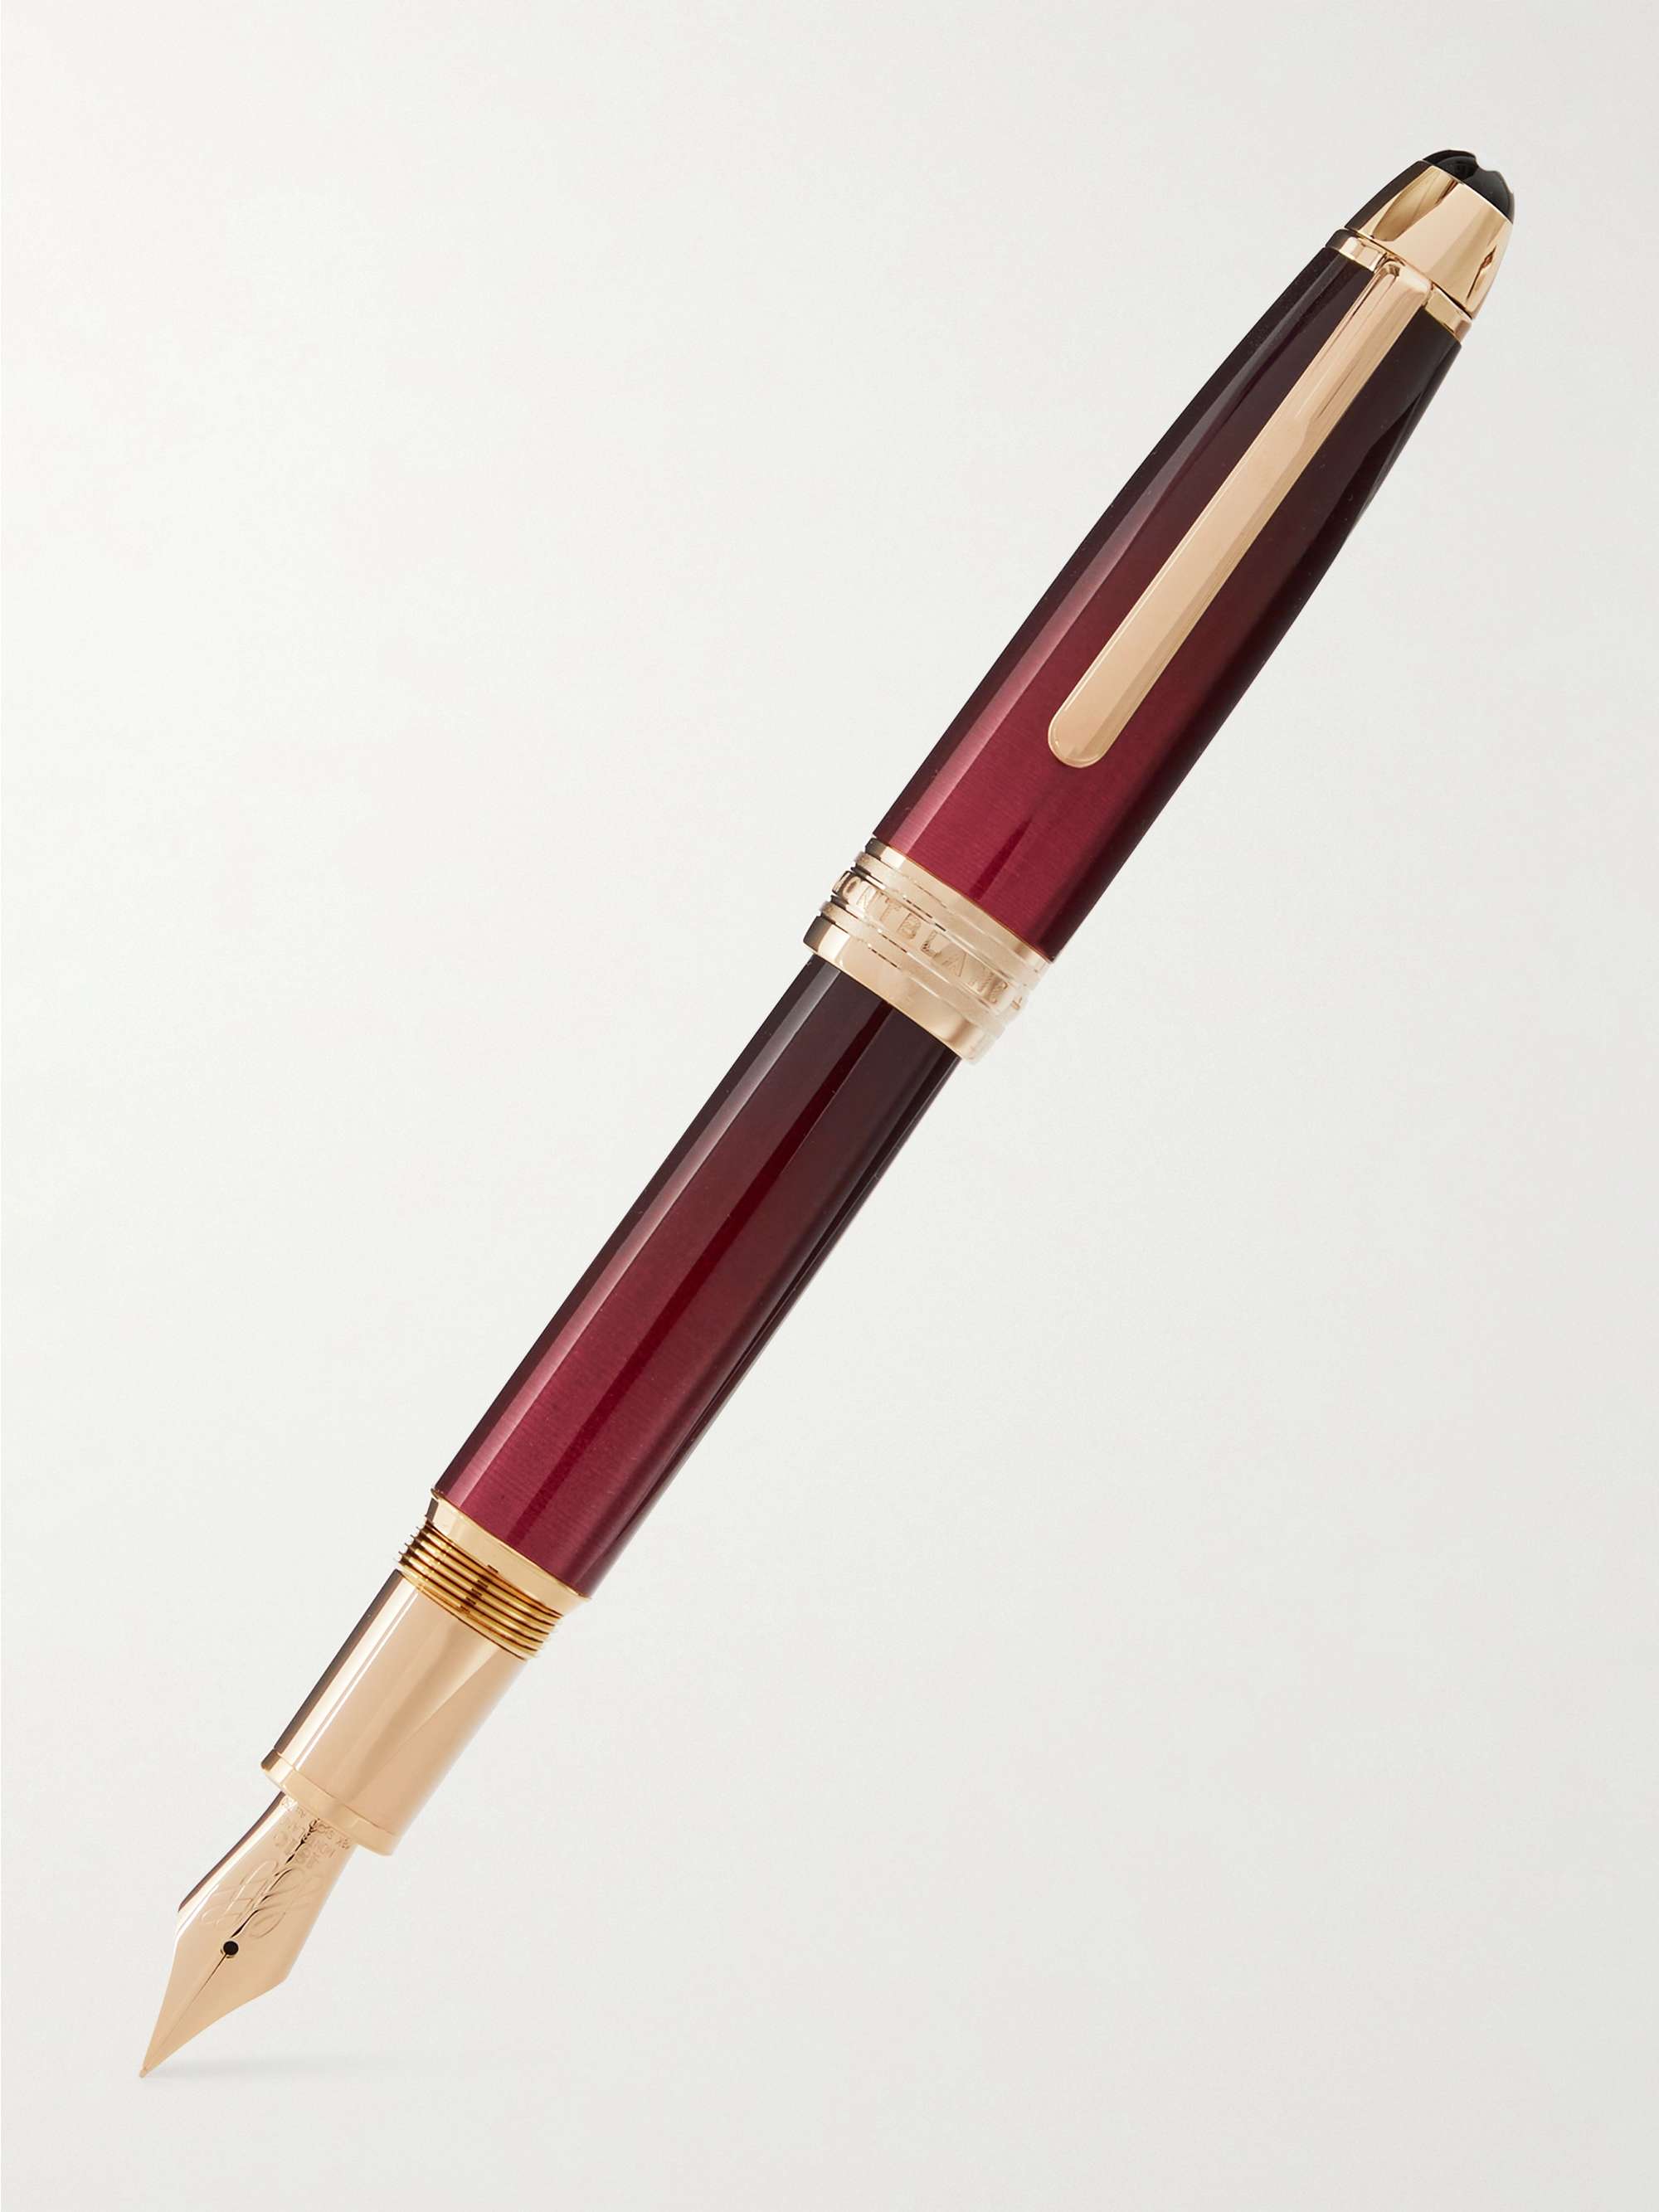 MONTBLANC Meisterstück Calligraphy Solitaire Resin and Gold-Plated Fountain Pen